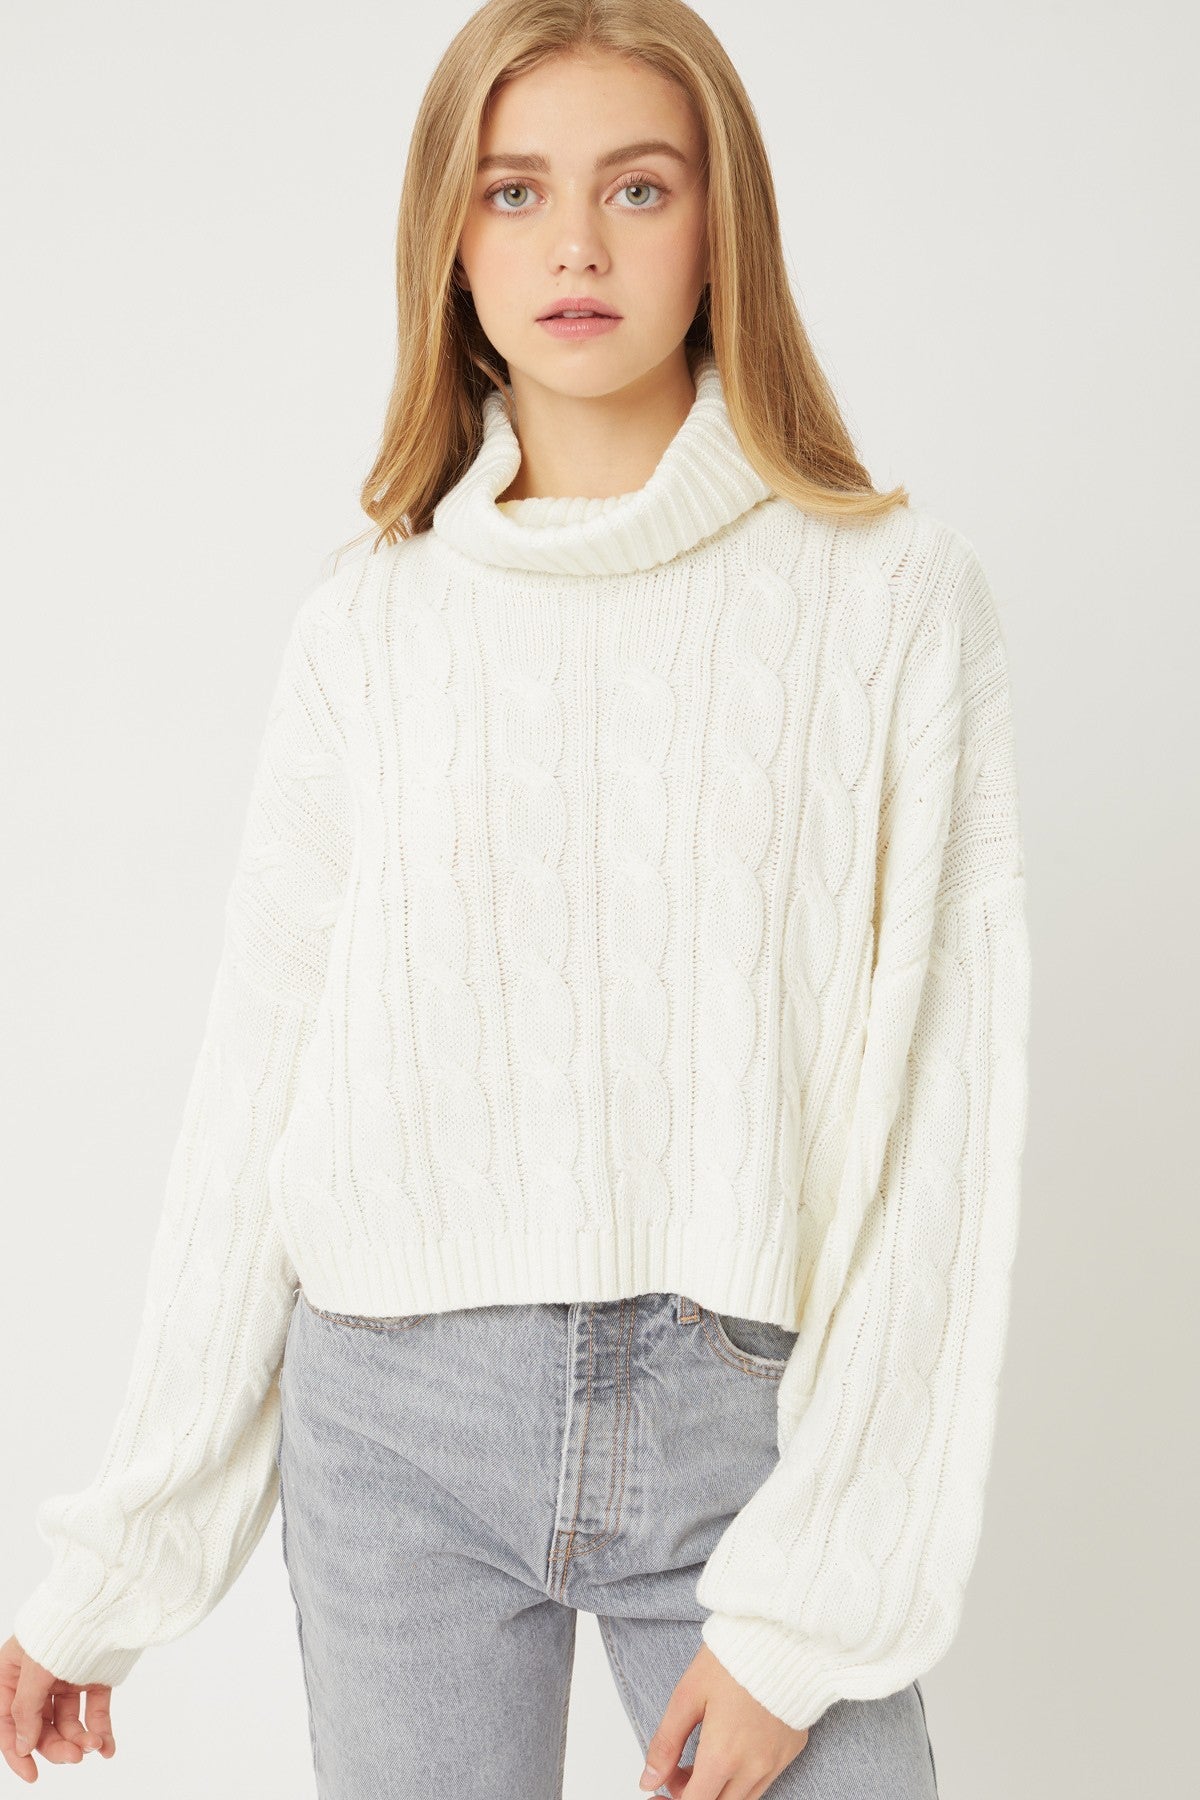 Turtle Neck Loose Fit Cable Knit Sweater Sunny EvE Fashion